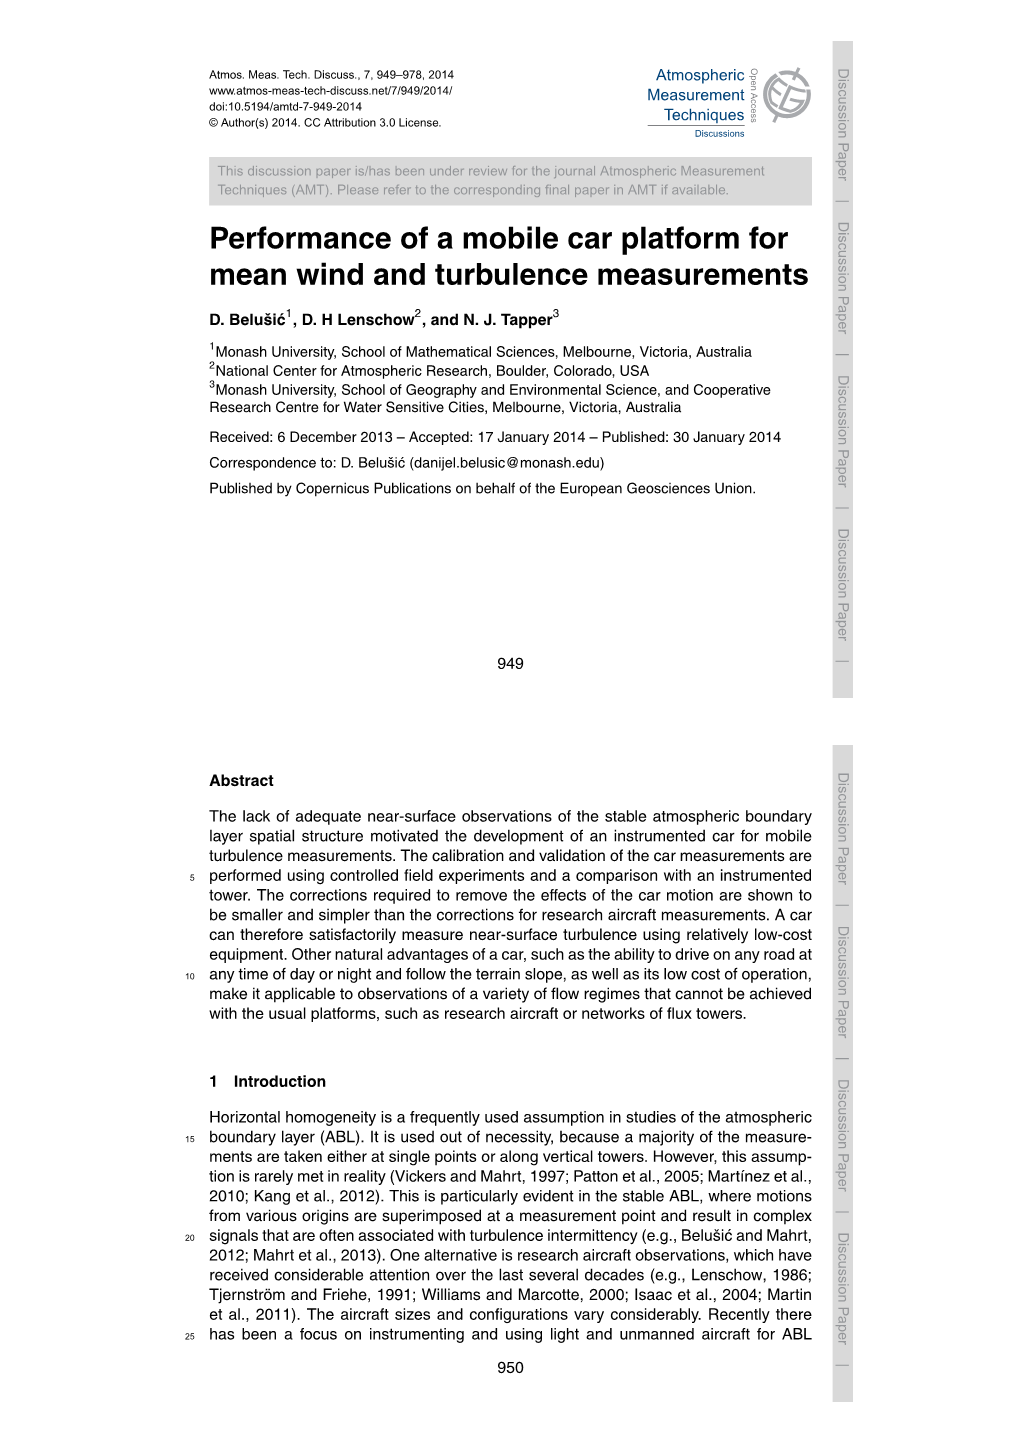 Performance of a Mobile Car Platform for Mean Wind and Turbulence